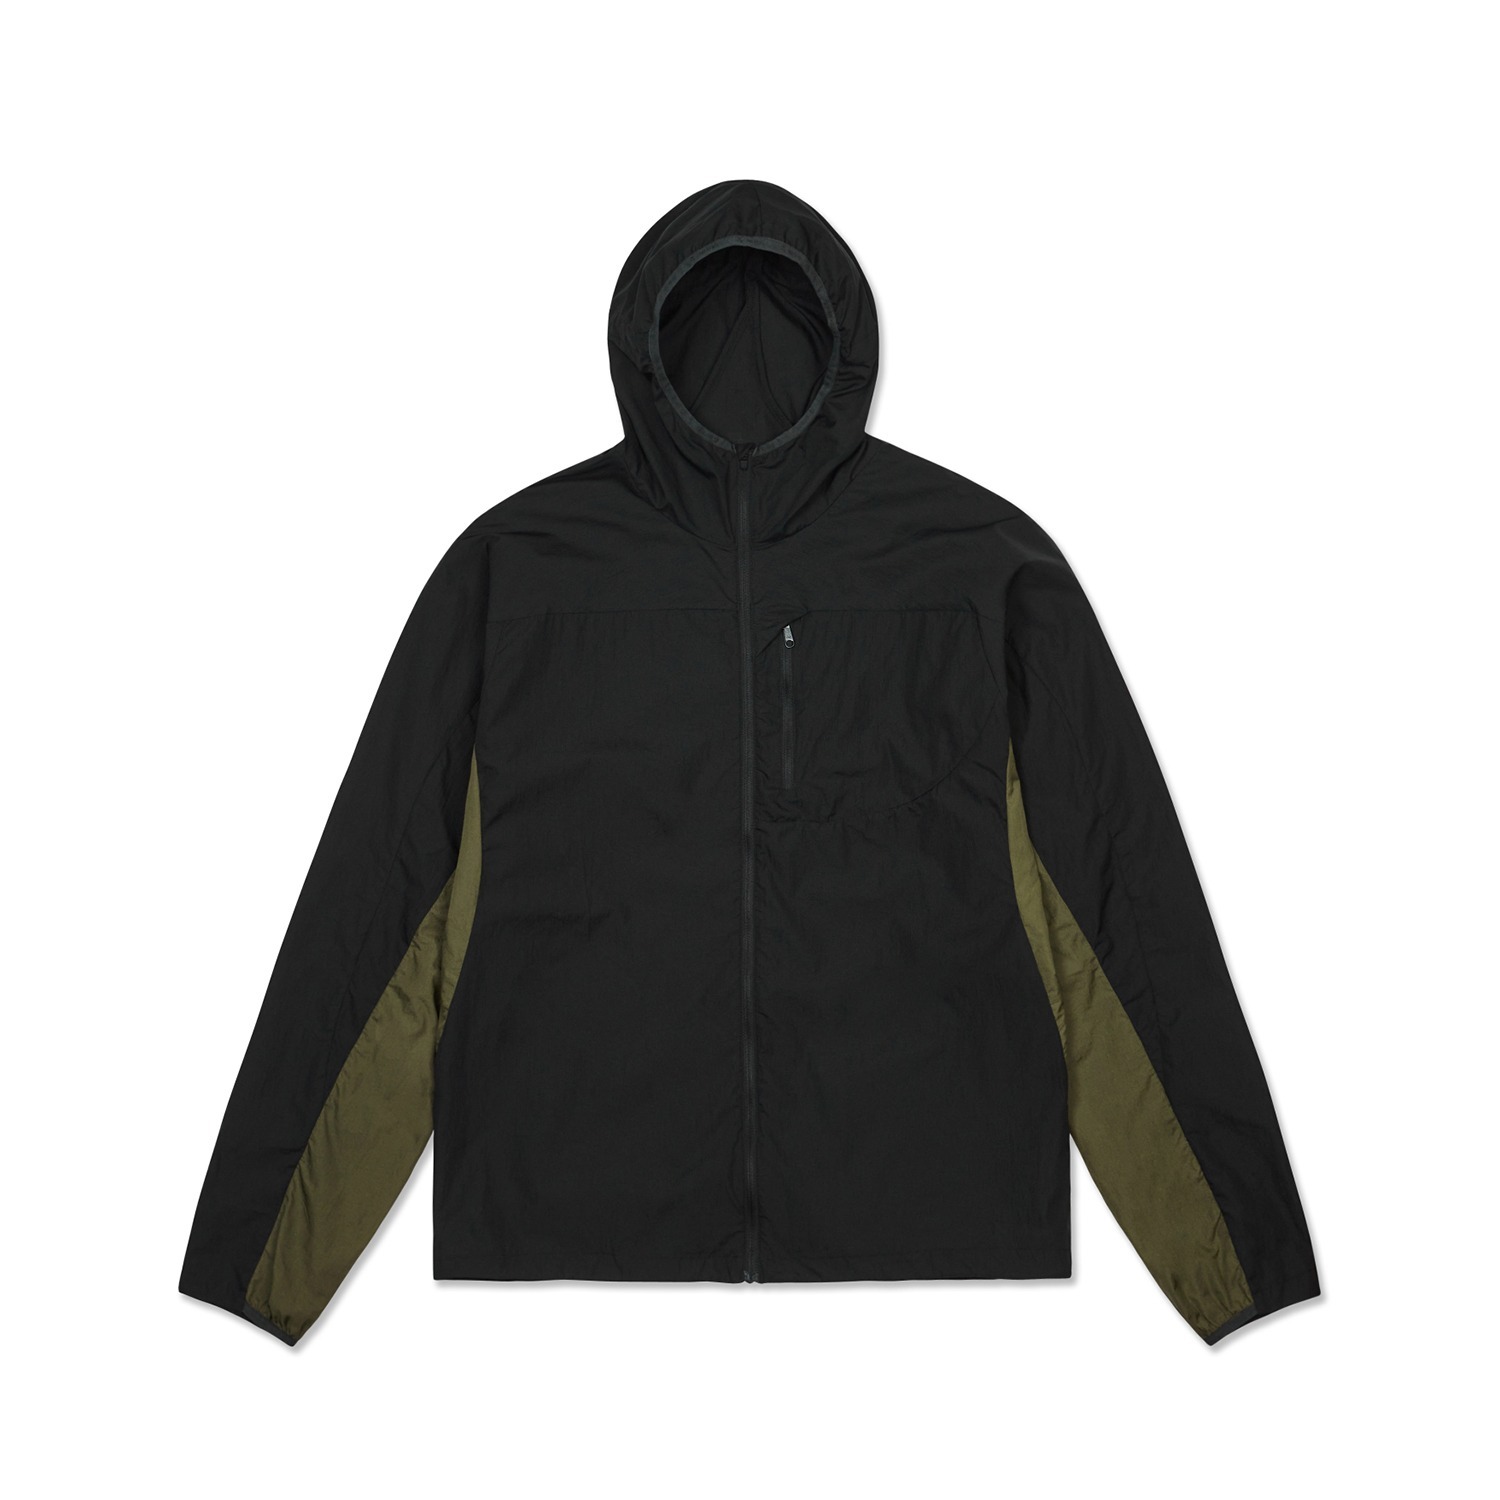 OUT OF ALL LIMONTA PACKABLE WINDSHELL HOODY JACKET-BLACK[아웃오브올 리몬타 패커블 윈드쉘 후디 자켓-블랙]